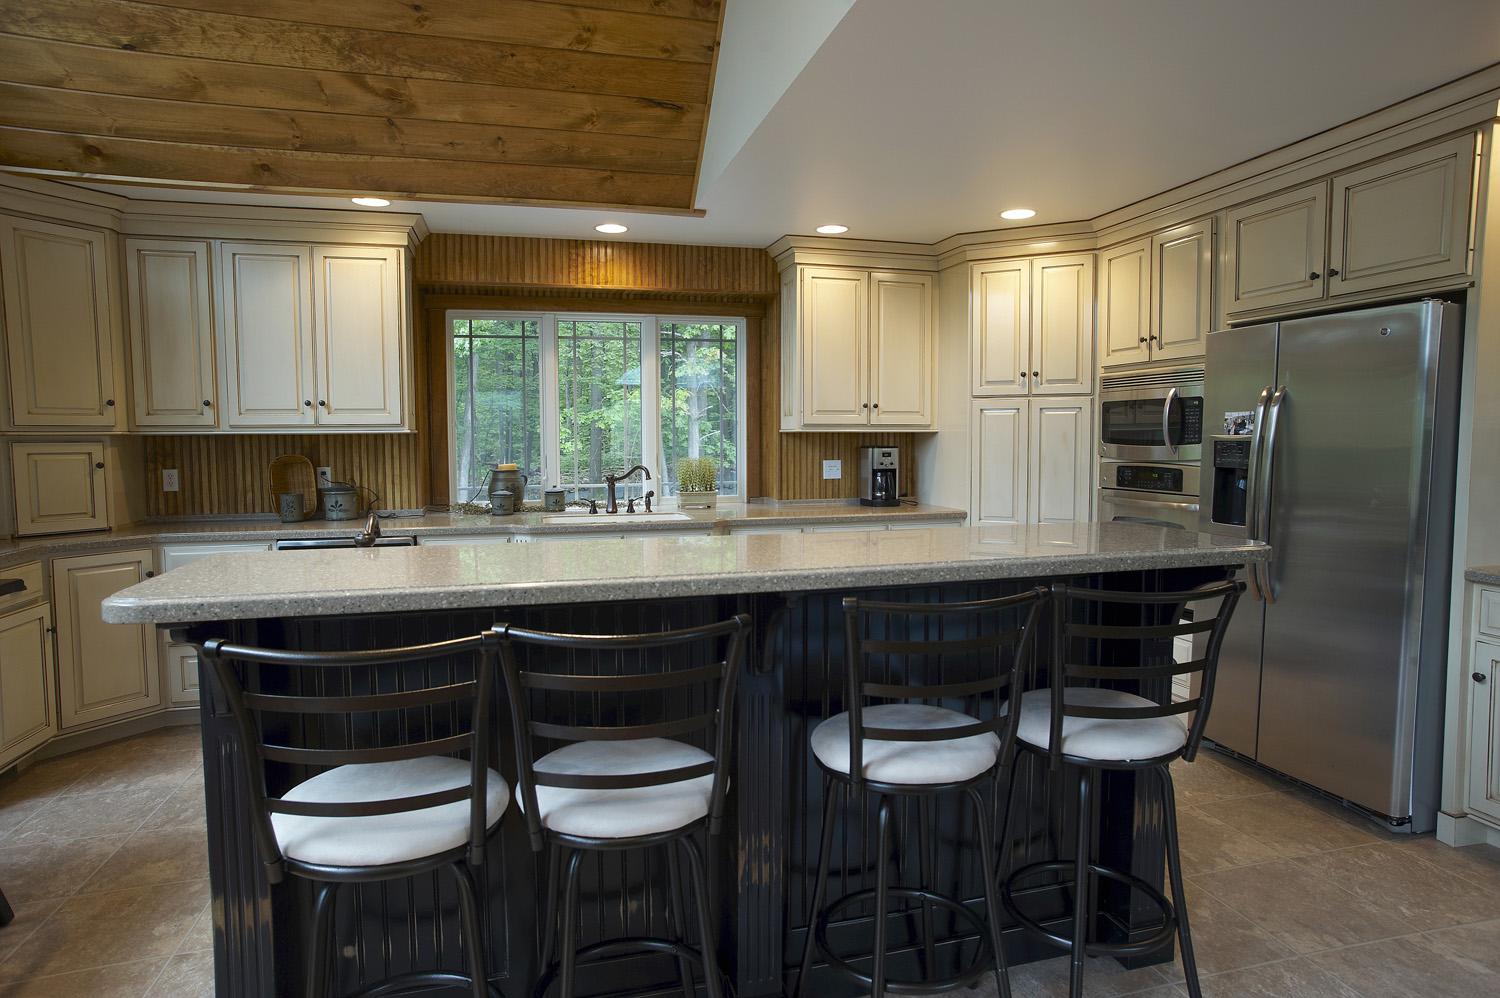 Custom made kitchen island with cabinets in the background